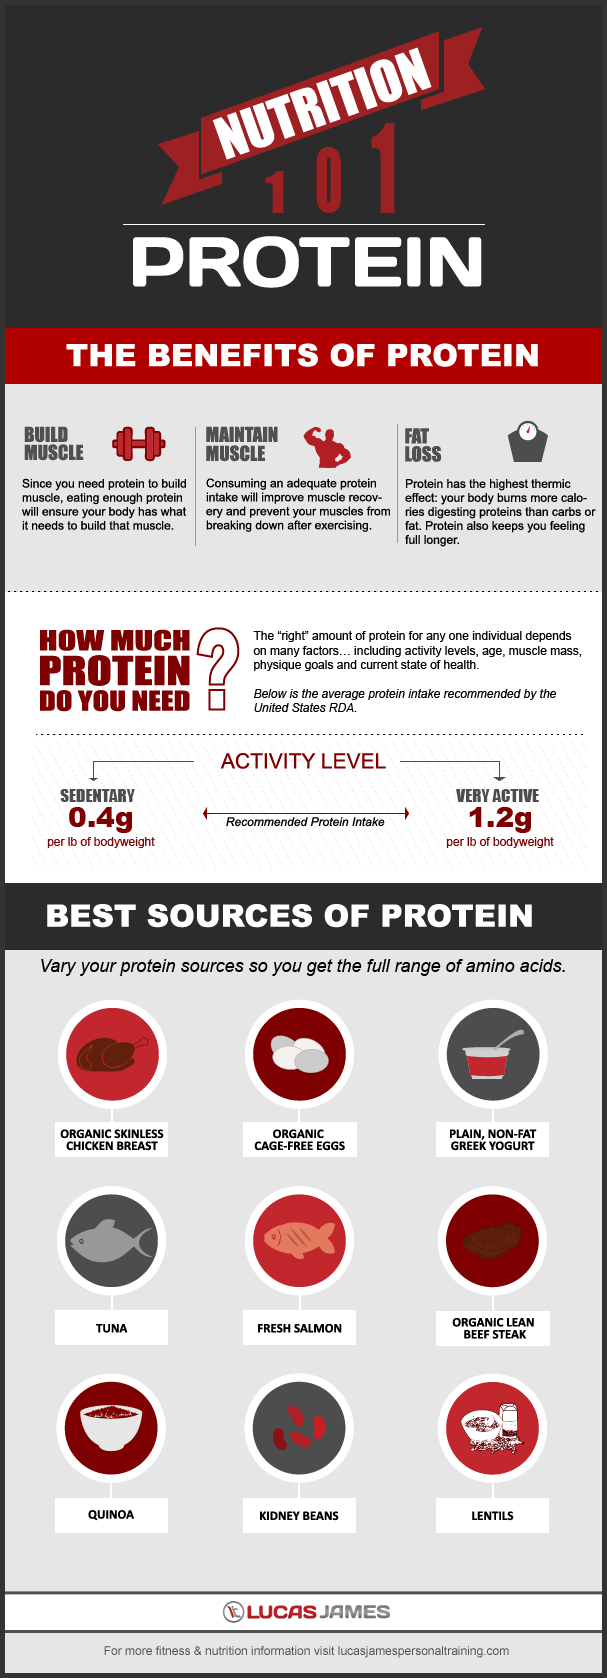 Nutrition 101: The Benefits of Protein